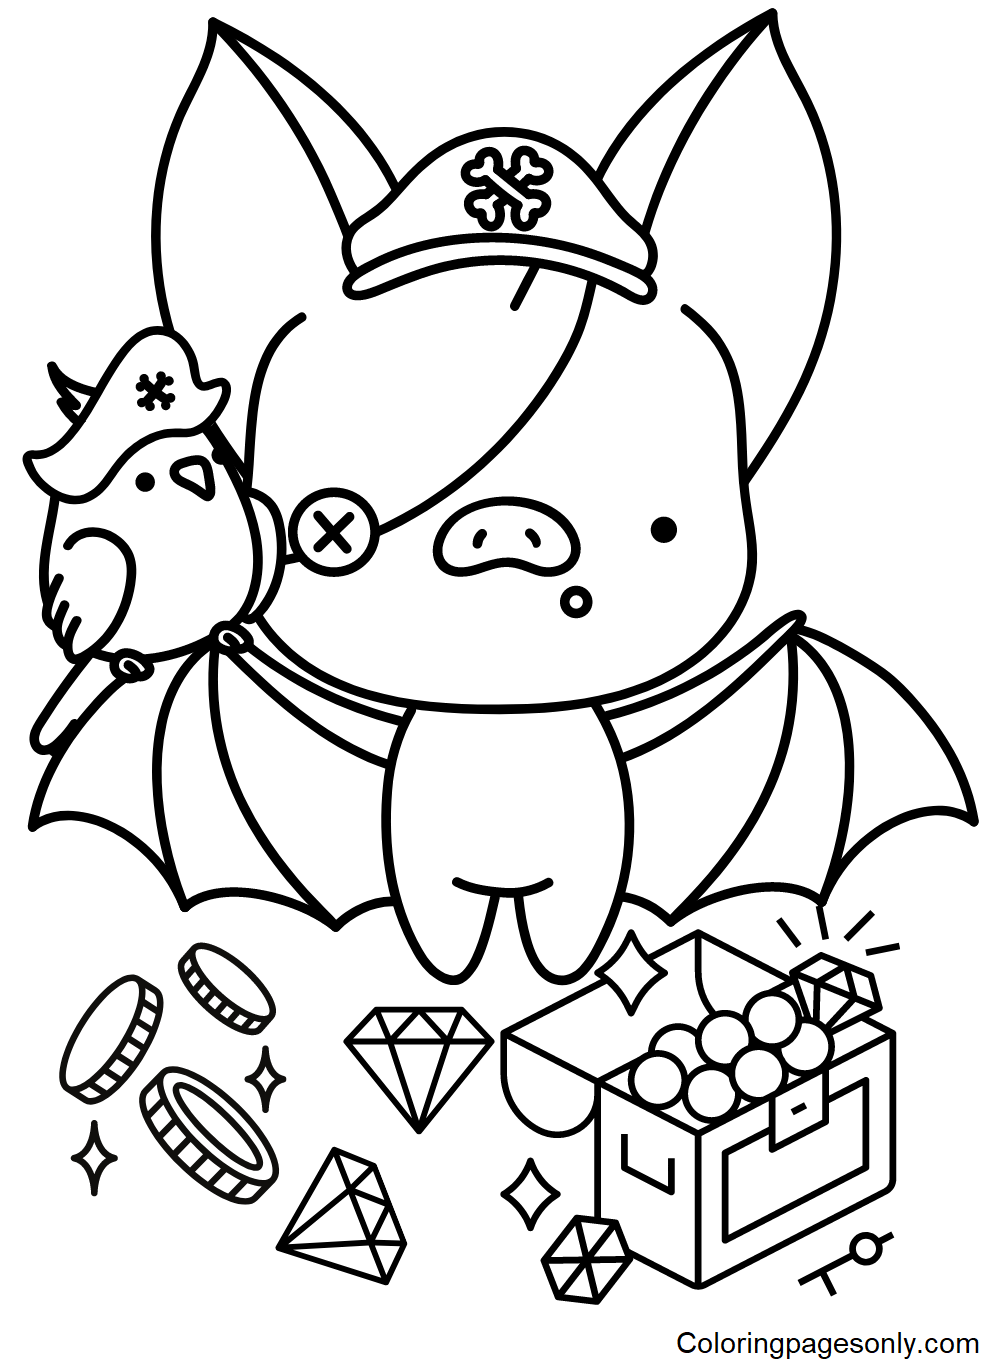 Bat in Pirate Costume Coloring Pages